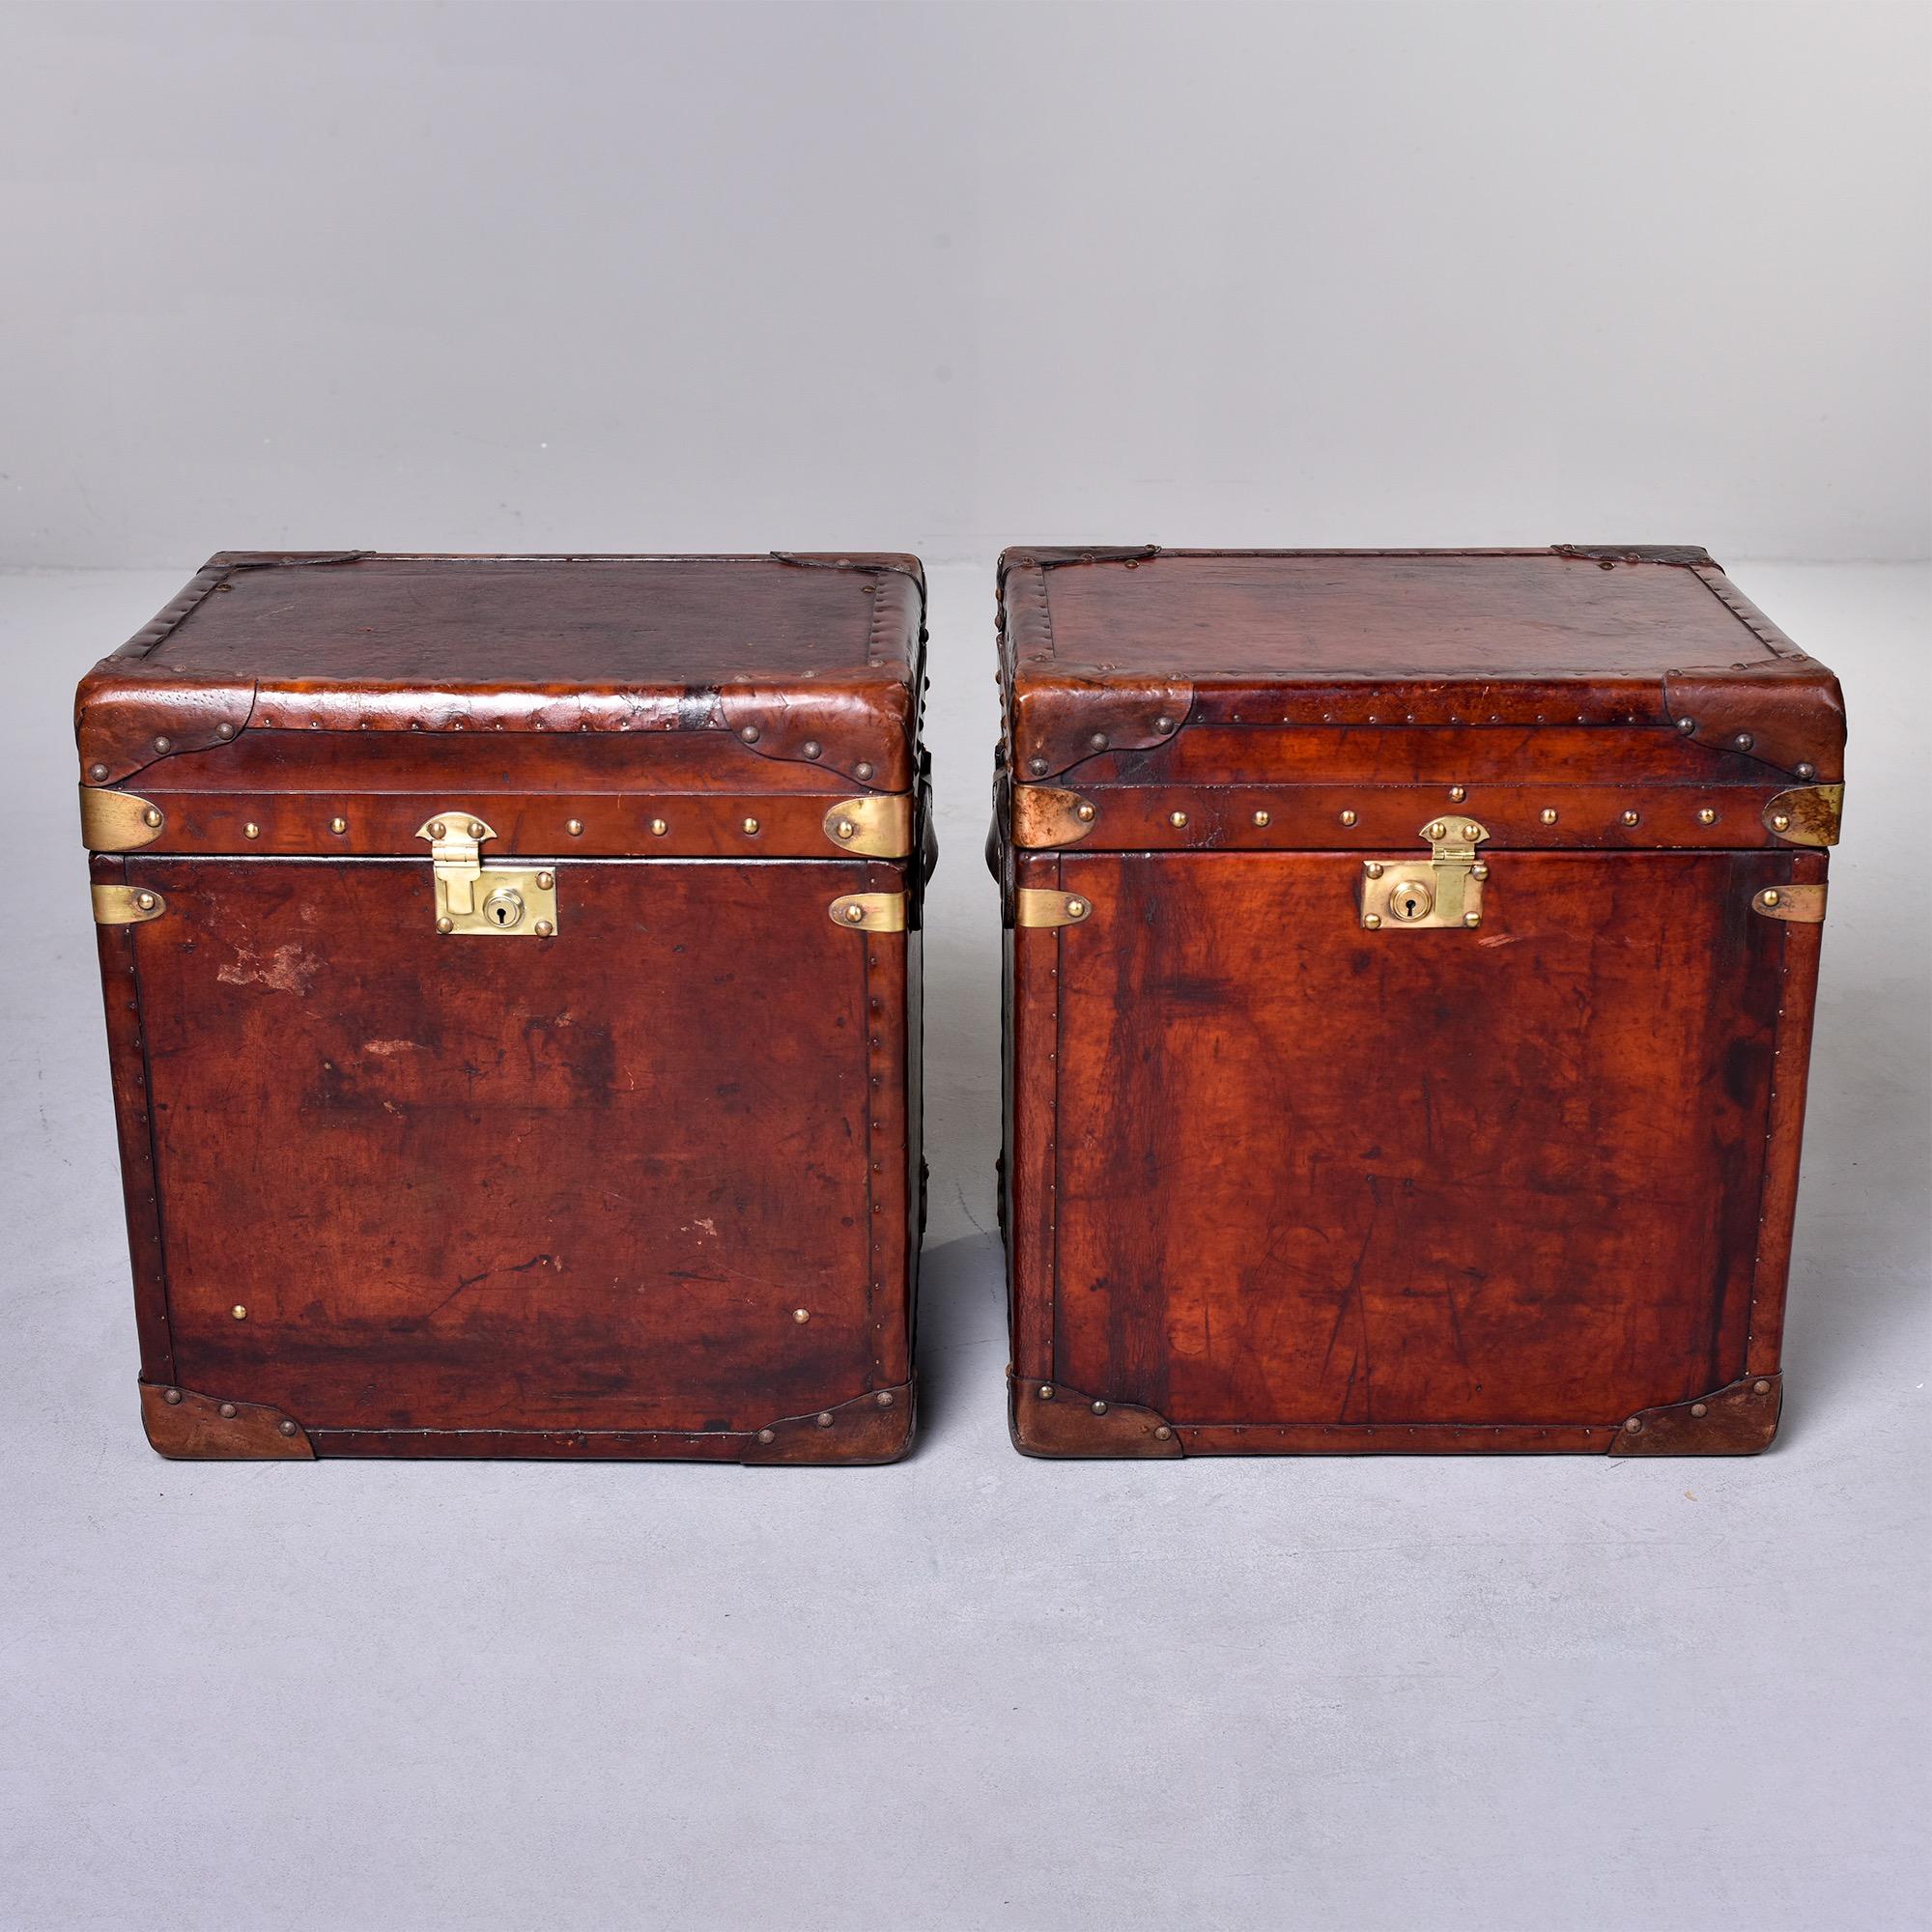 Pair of circa 1910 English leather covered trunks have been restored with new blue velour liners on the inside and reconditioned leather on the outside. Make great end tables. Sold and priced as a pair.